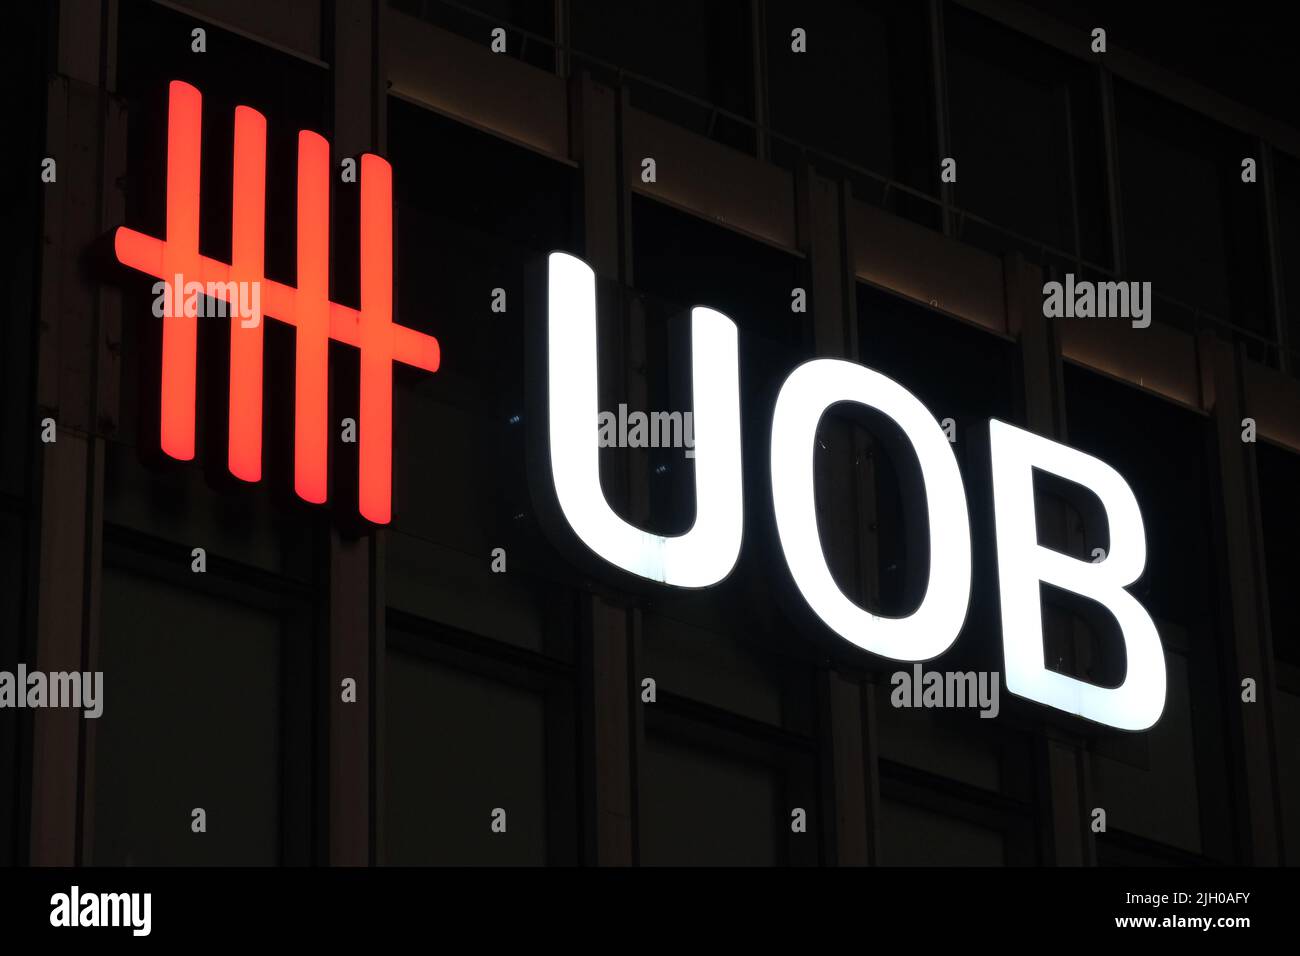 Shanghai,China-Feb.8th 2022: close up UOB bank logo in dark background. United Overseas Bank Limited company sign. Stock Photo